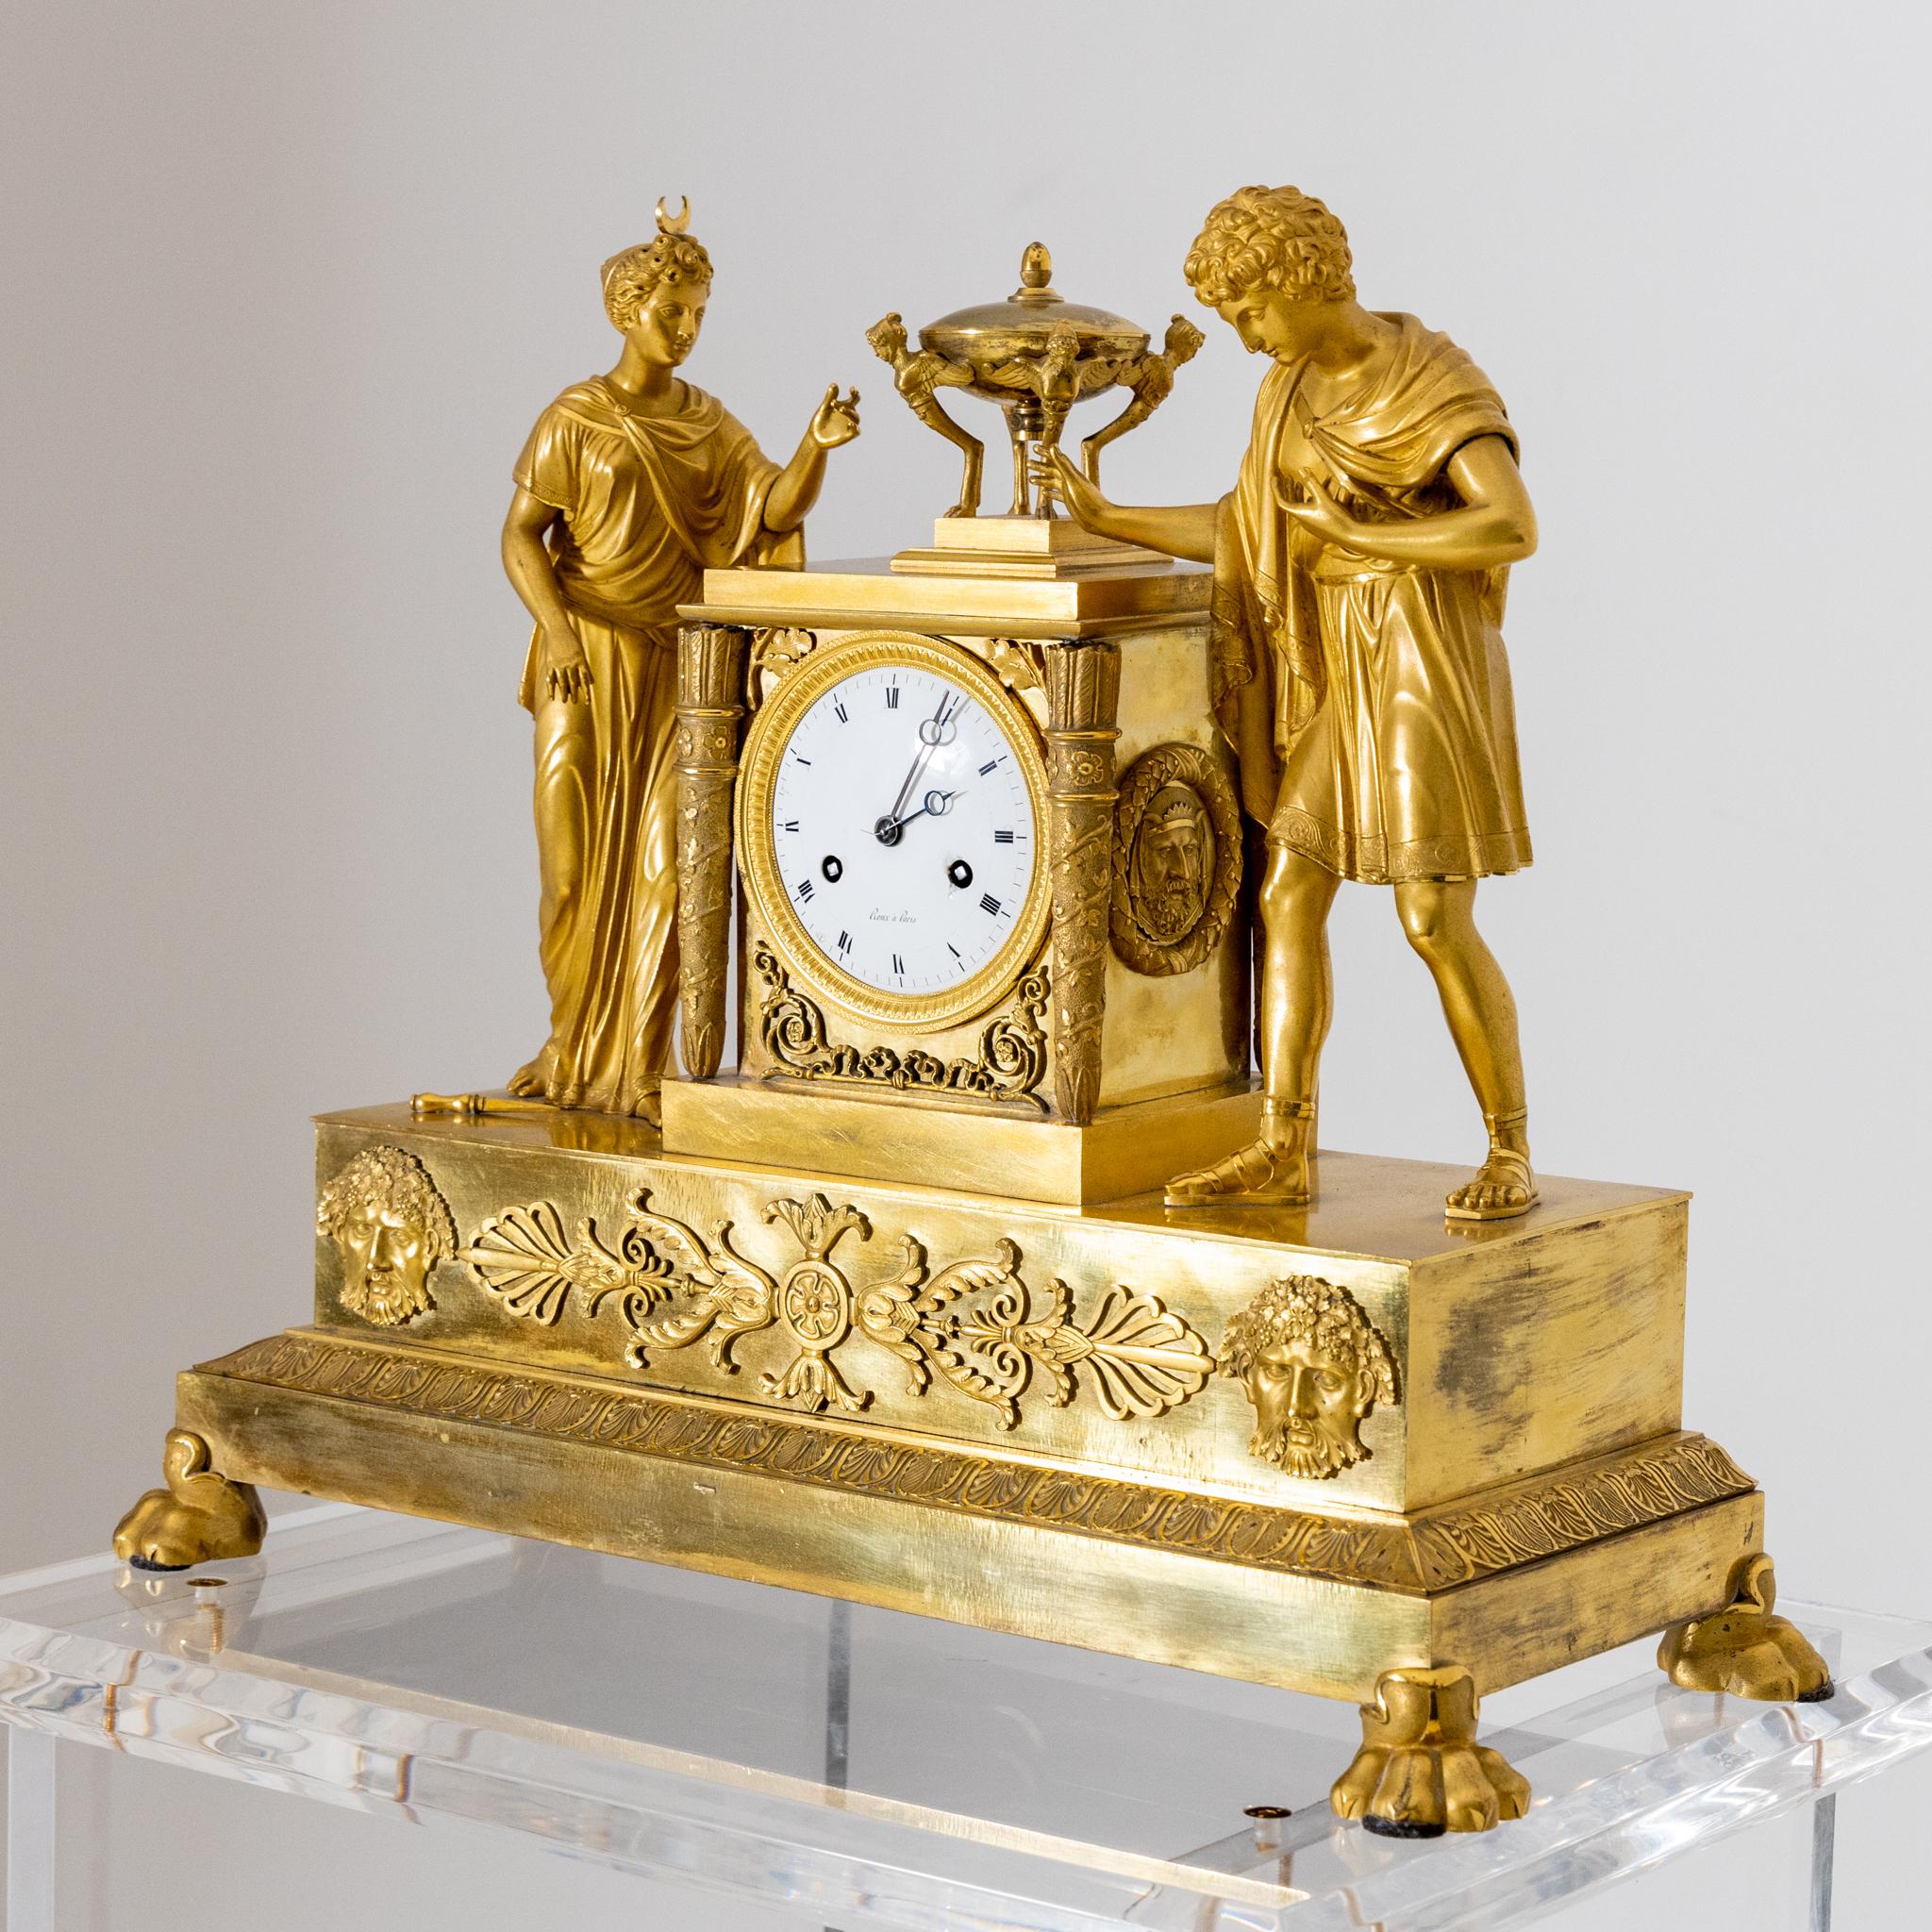 Fire-gilt mantle clock on lion paw feet with full-figure depictions of Diana and Apollo. Signed Roux à Paris on the enamel dial.